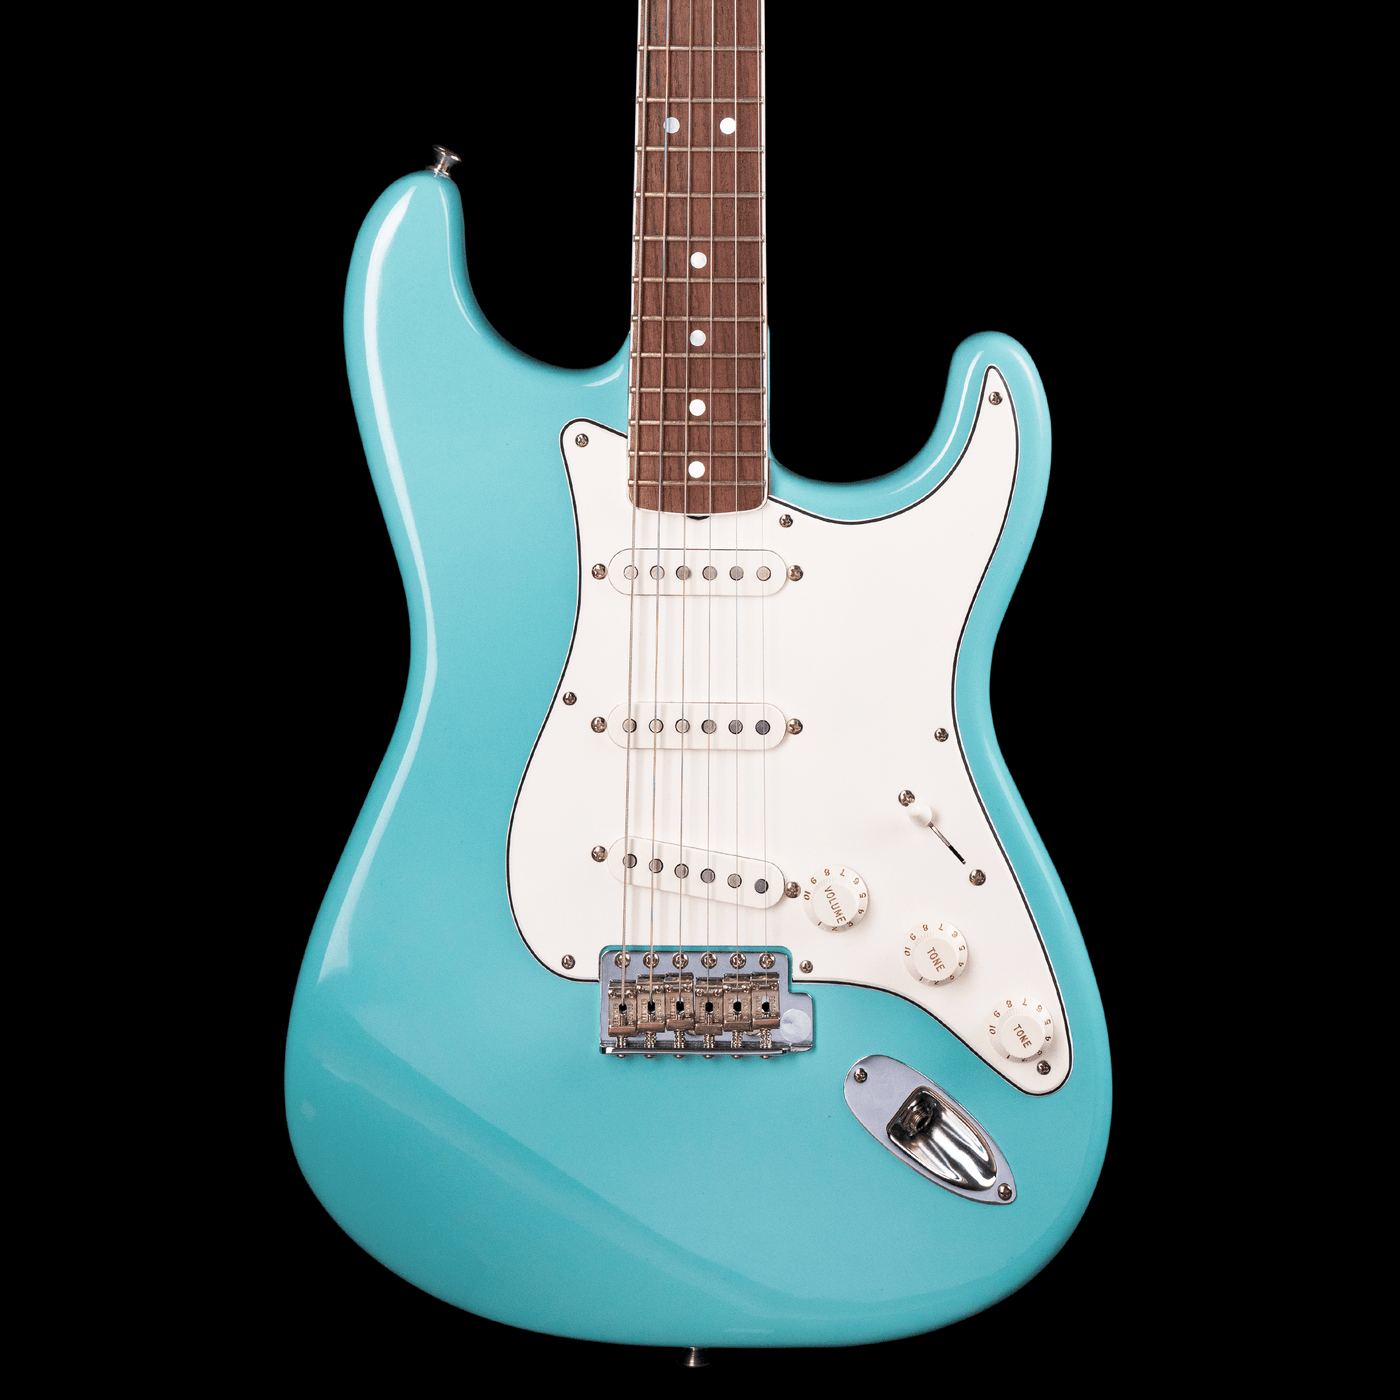 Fender Stratocaster Eric Johnson Tropical Turquoise 2021 - $2499990 - Gearhub - The Fender Eric Johnson Stratocaster RW solidbody electric guitar brings you an instrument fit for a guitar tone master! Eric is also known for his perfectionism and dedicated search for the ultimate guitar. The brainchild of Johnson himself, the Eric Johnson Stratocaster RW is designed with Eric's own personal features and preferences, and it is made possible because of his expressed desire to give something back to the collect